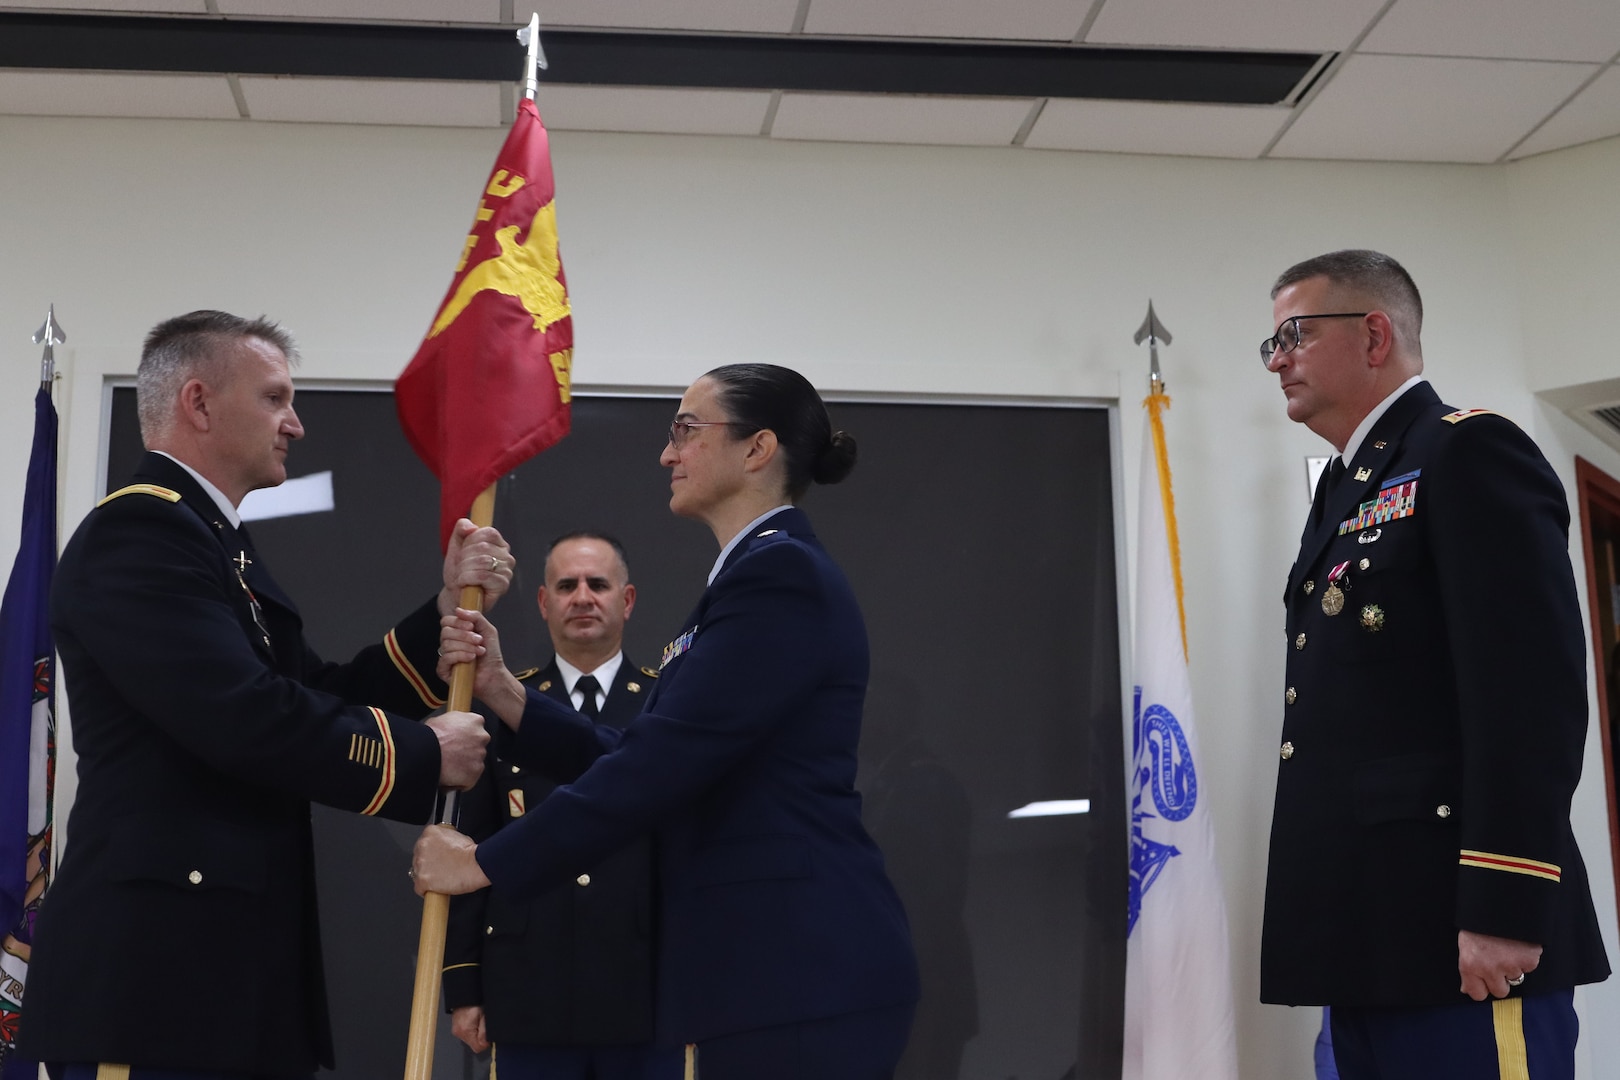 VNG State Military Reservation welcomes Huffman as new commander